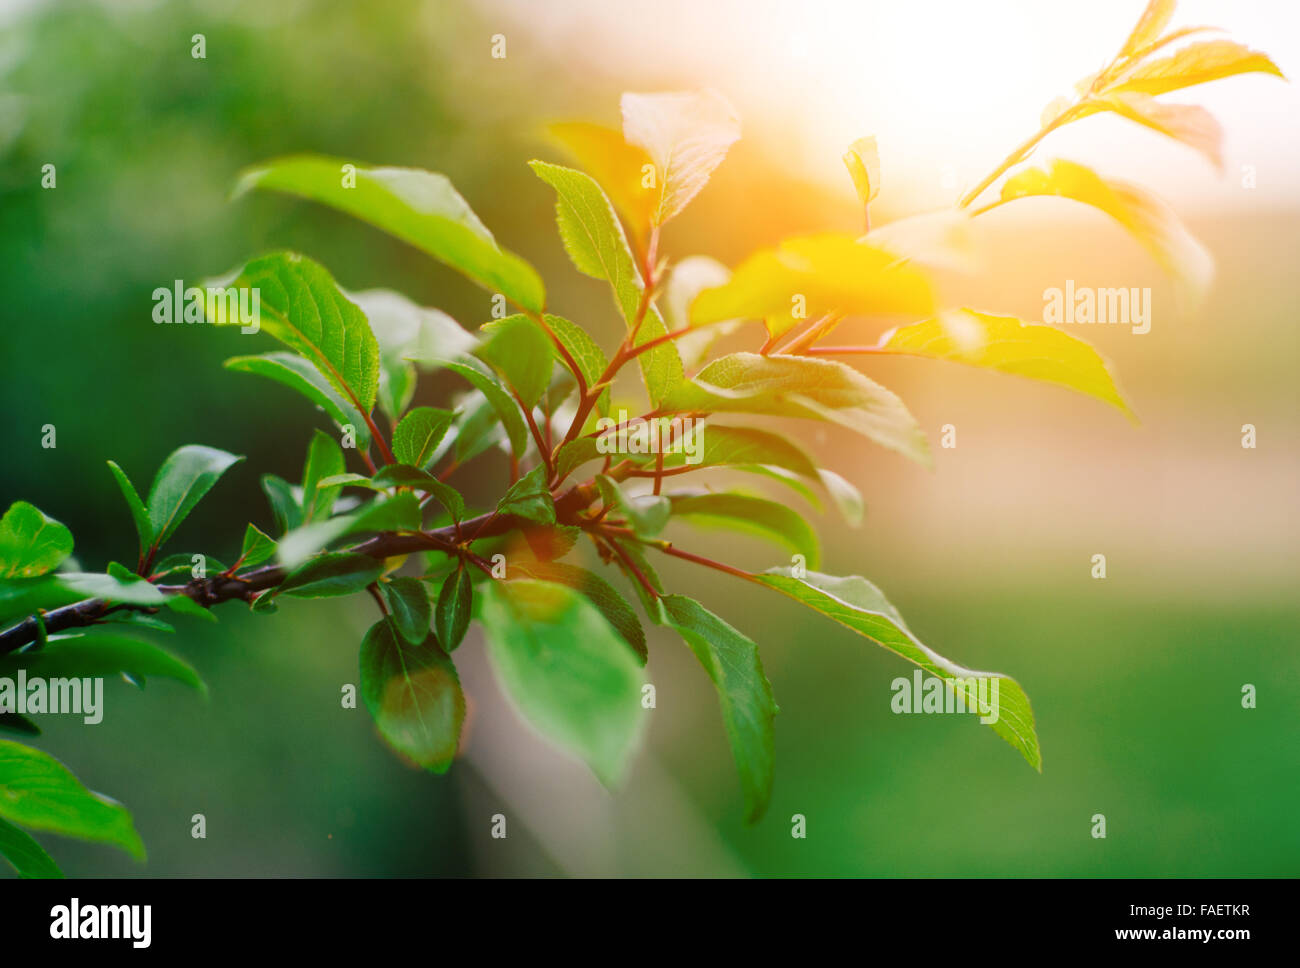 Branch of the apple tree with sunlight Stock Photo